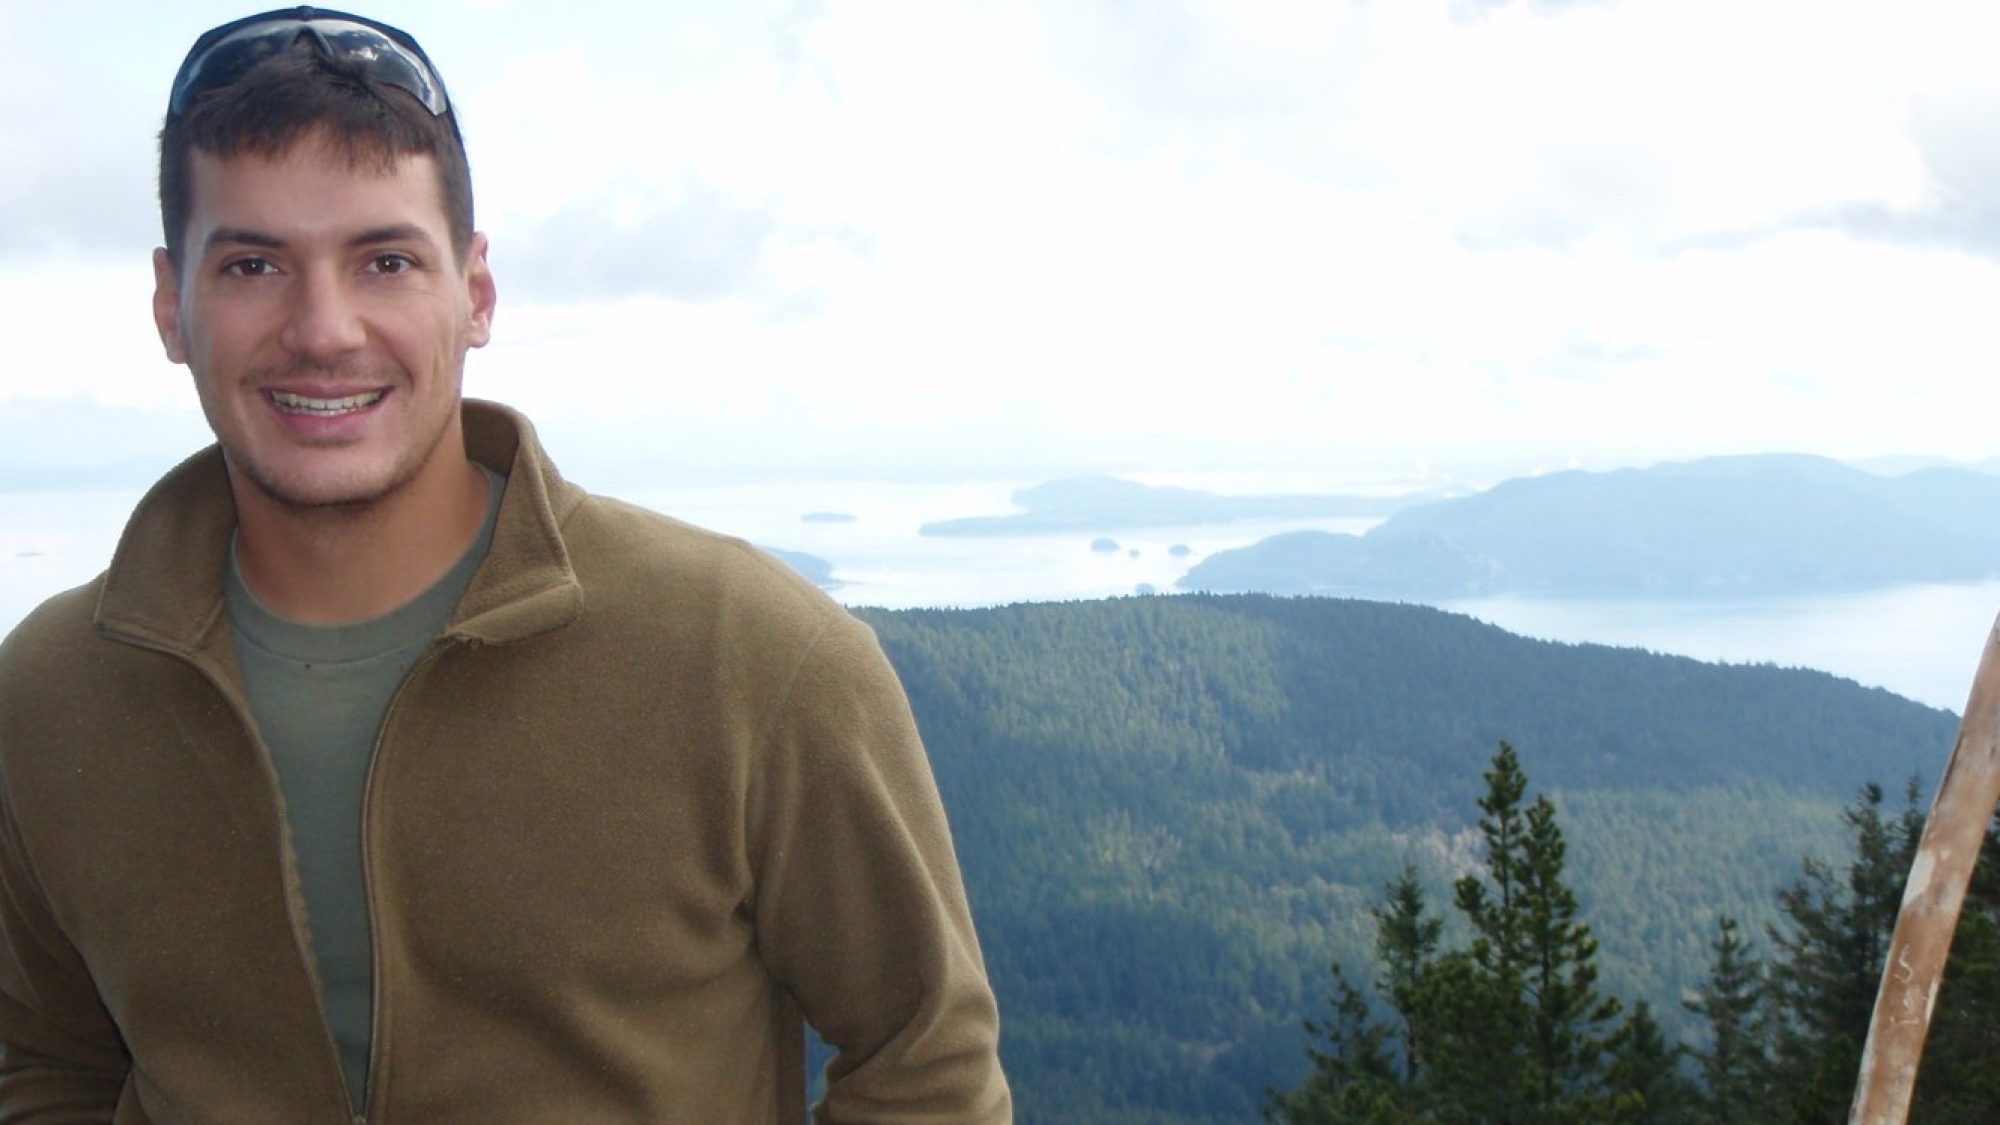 Austin Tice wears a dark khaki-colored zip up in front of mountains